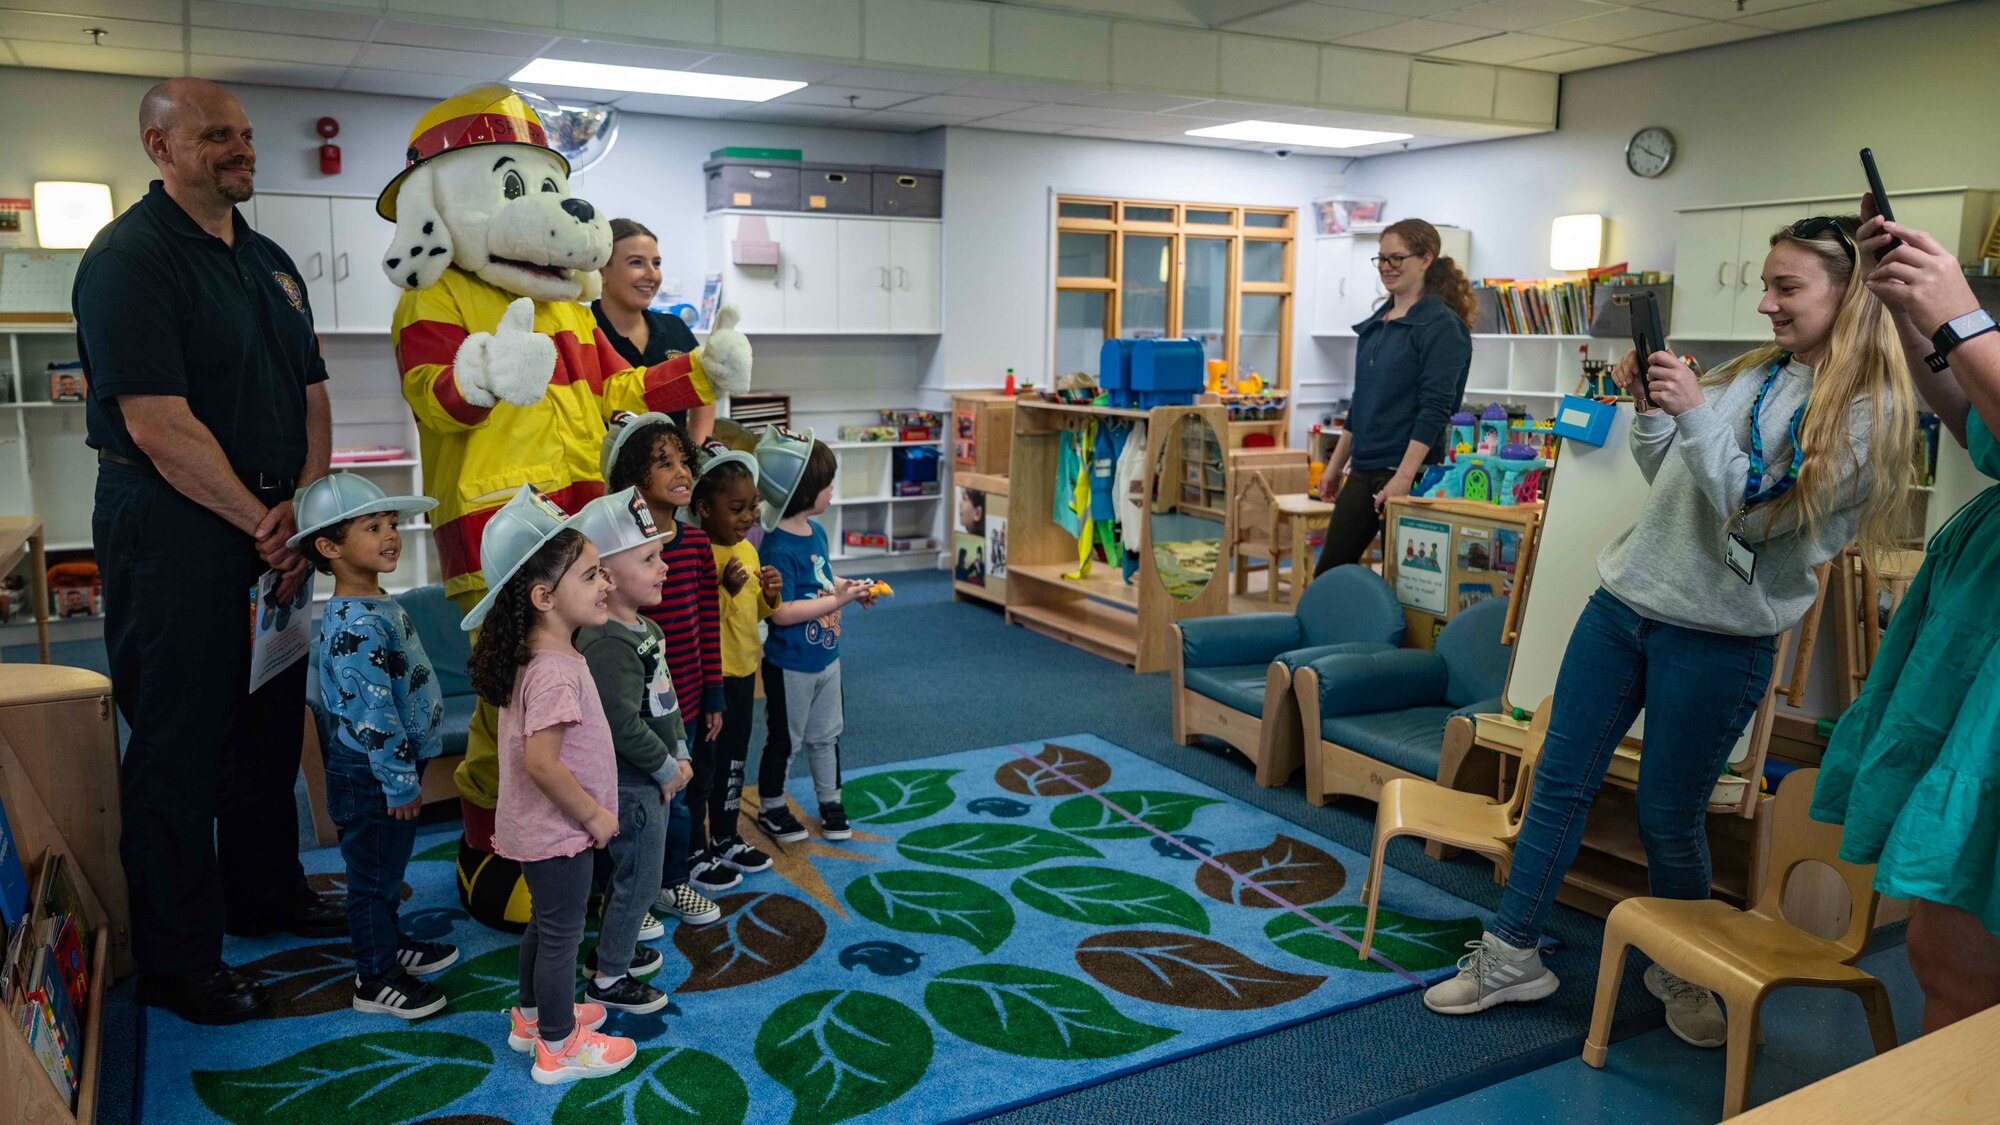 The 100th Civil Engineer Squadron Fire Department hones on this year’s fire prevention week with the message “Cooking safety starts with you” at Royal Air Force Mildenhall, England, Oct. 11, 2023. Sparky the Fire Dog and members of the 100th Civil Engineer Squadron Fire Department read fire safety books and provided handouts to pre-school classes at the 100th Force Support Squadron Child Development Center, strengthening military family morale and increasing awareness. (U.S. Air Force photo by Senior Airman Viviam Chiu)